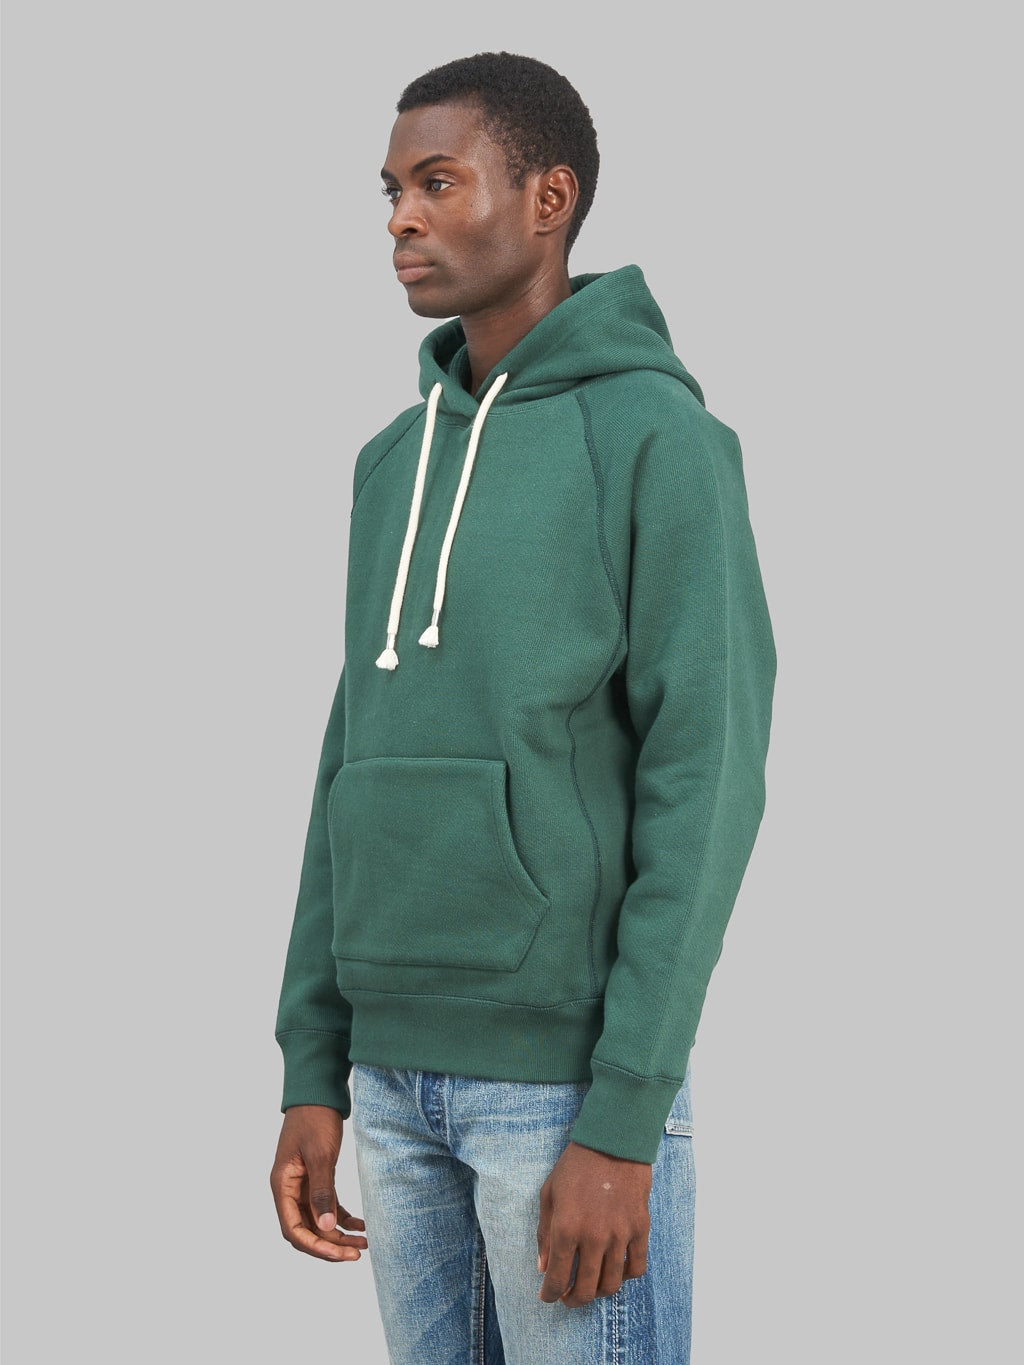 Wonder Looper Pullover Hoodie Double Heavyweight French Terry green athletic side fit